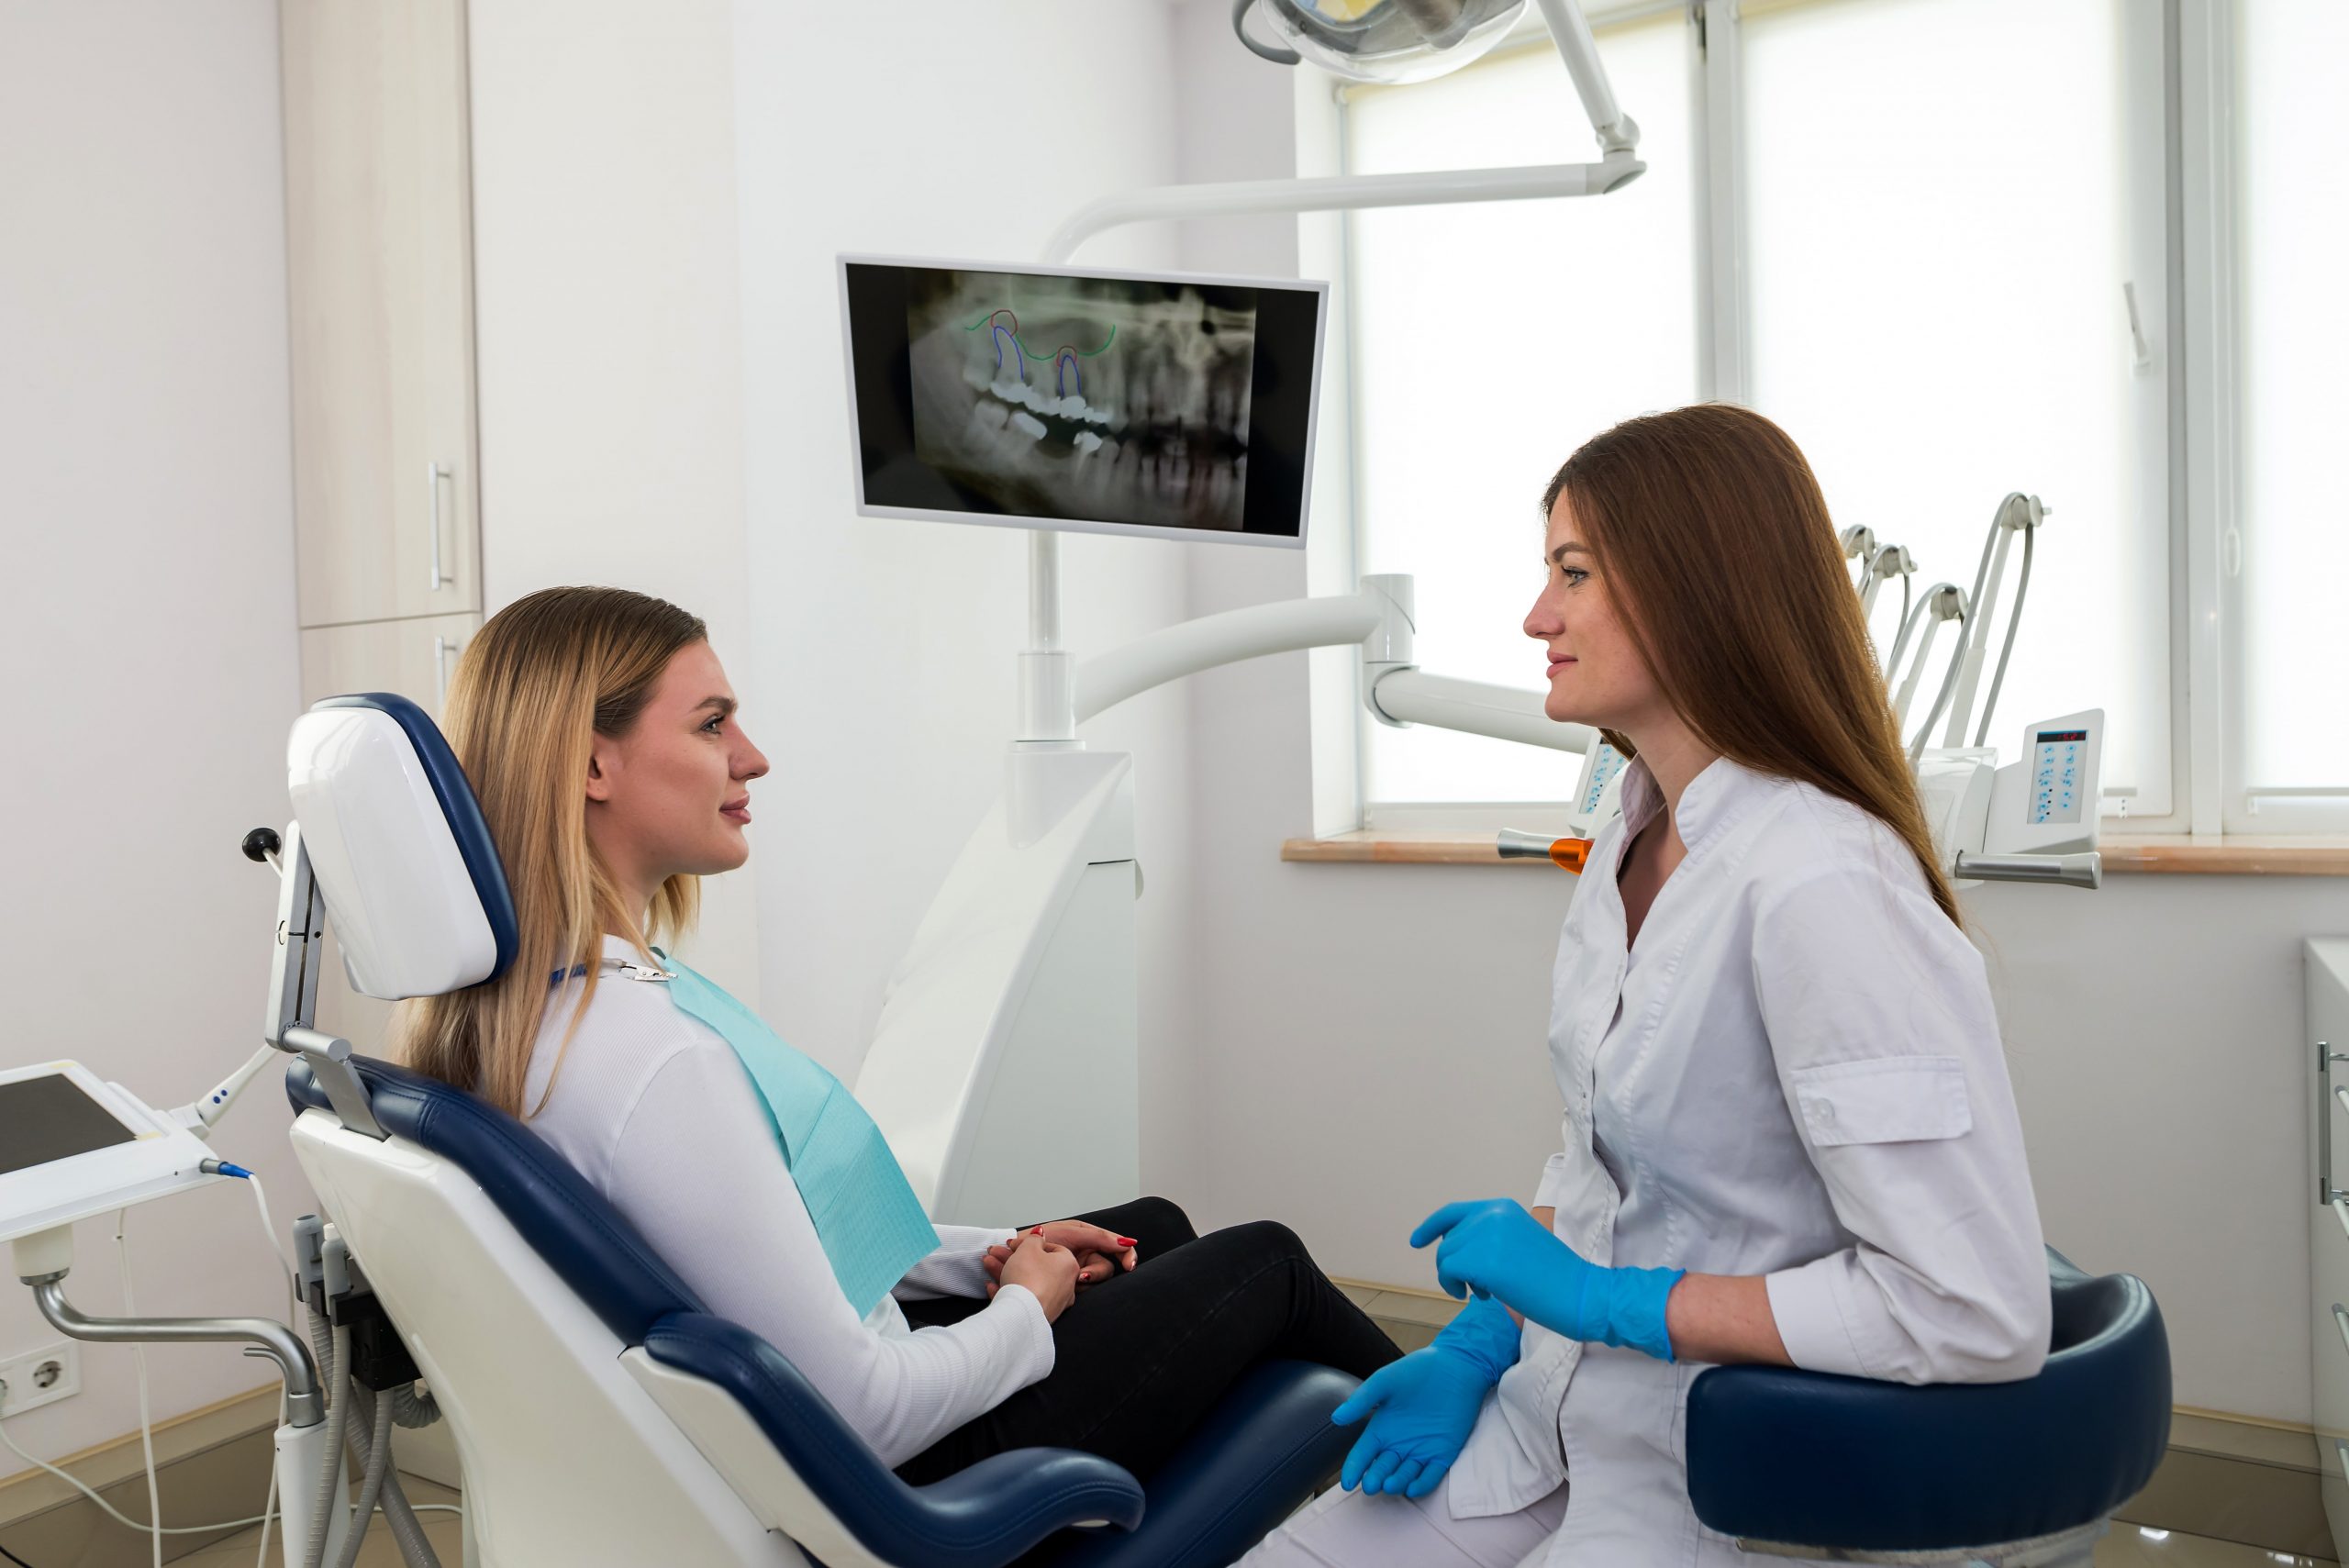 Dentist speaking to patient about treatment options.